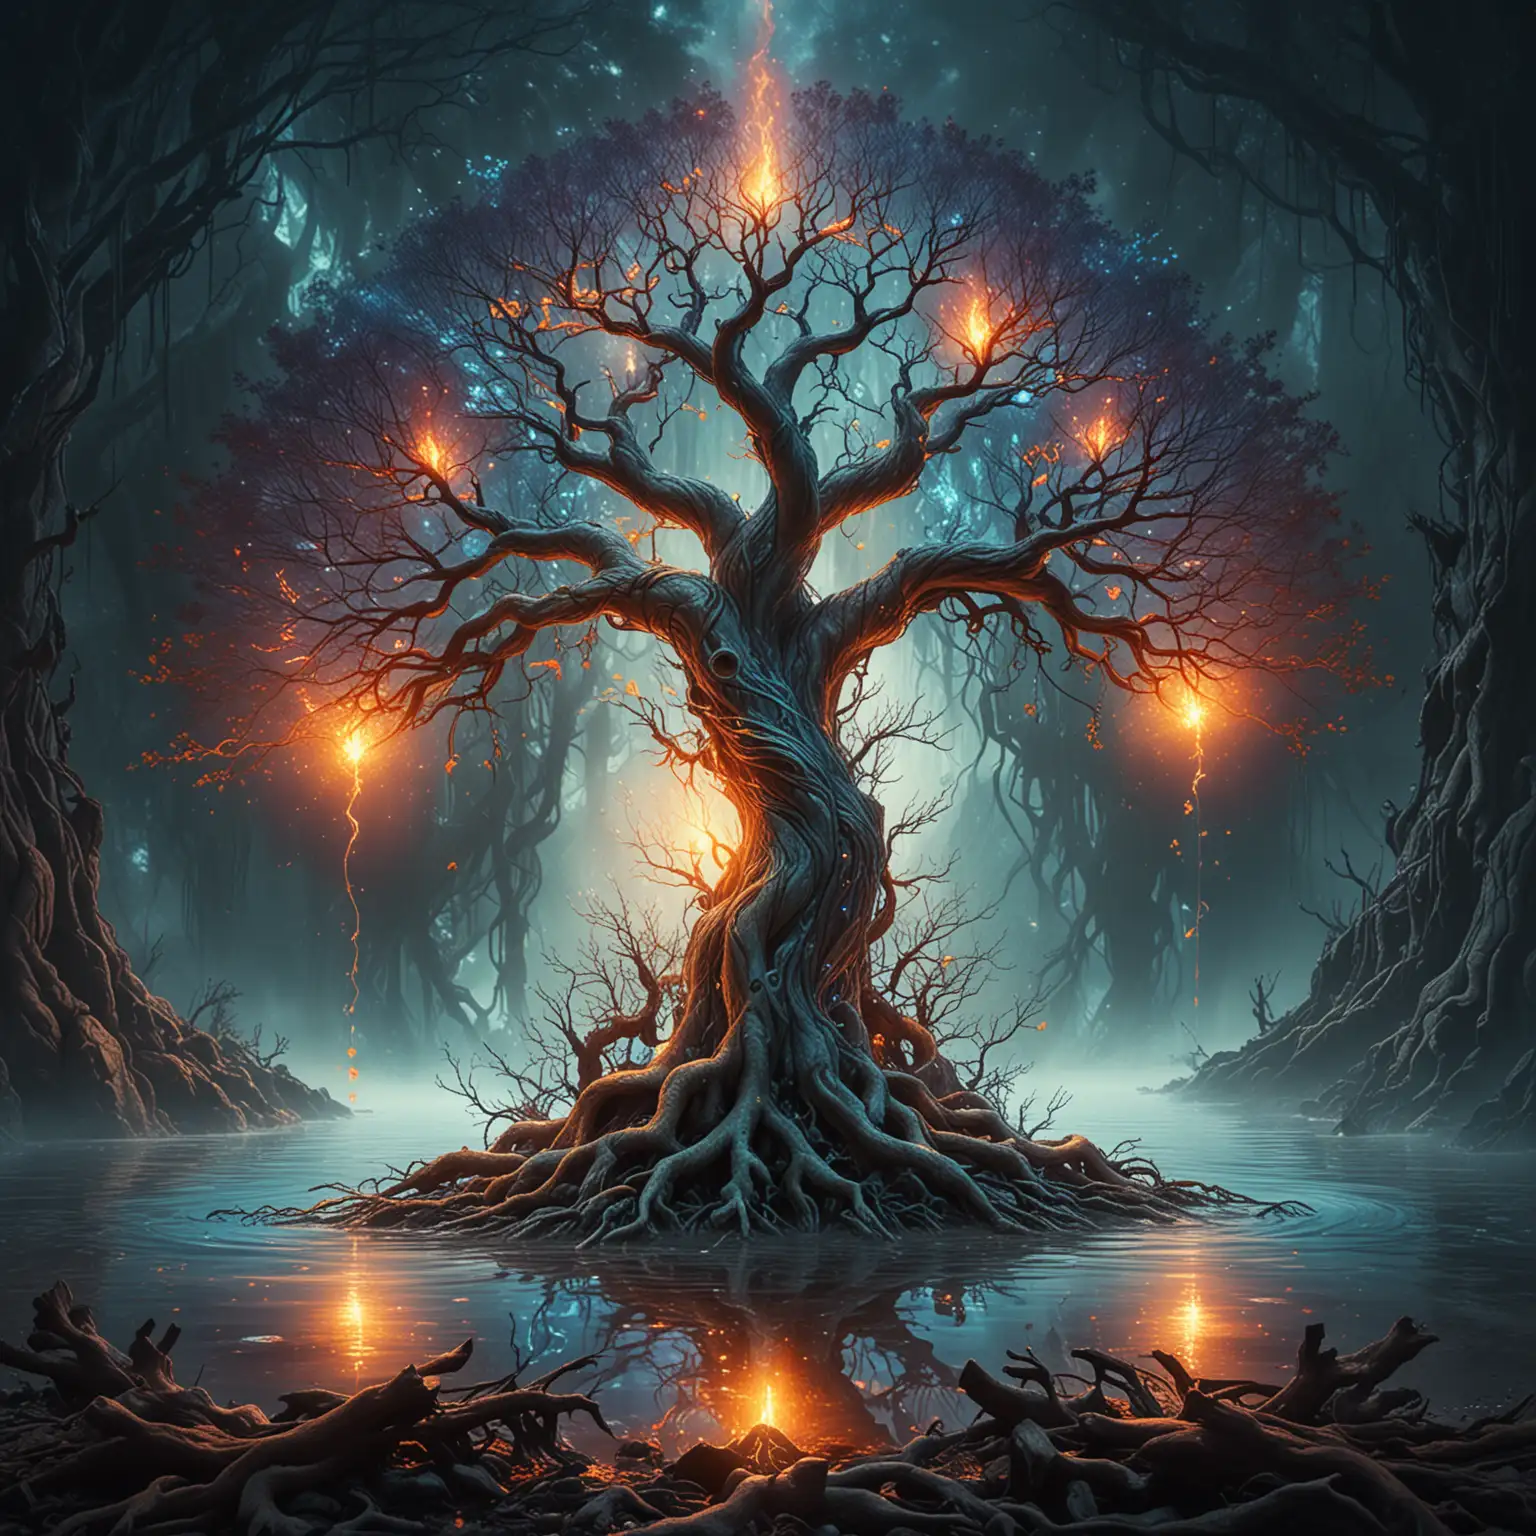 A world tree with elemental fire and water below the roots, alternate planes of existence in the branches, vivid fantasy, high contrast colors